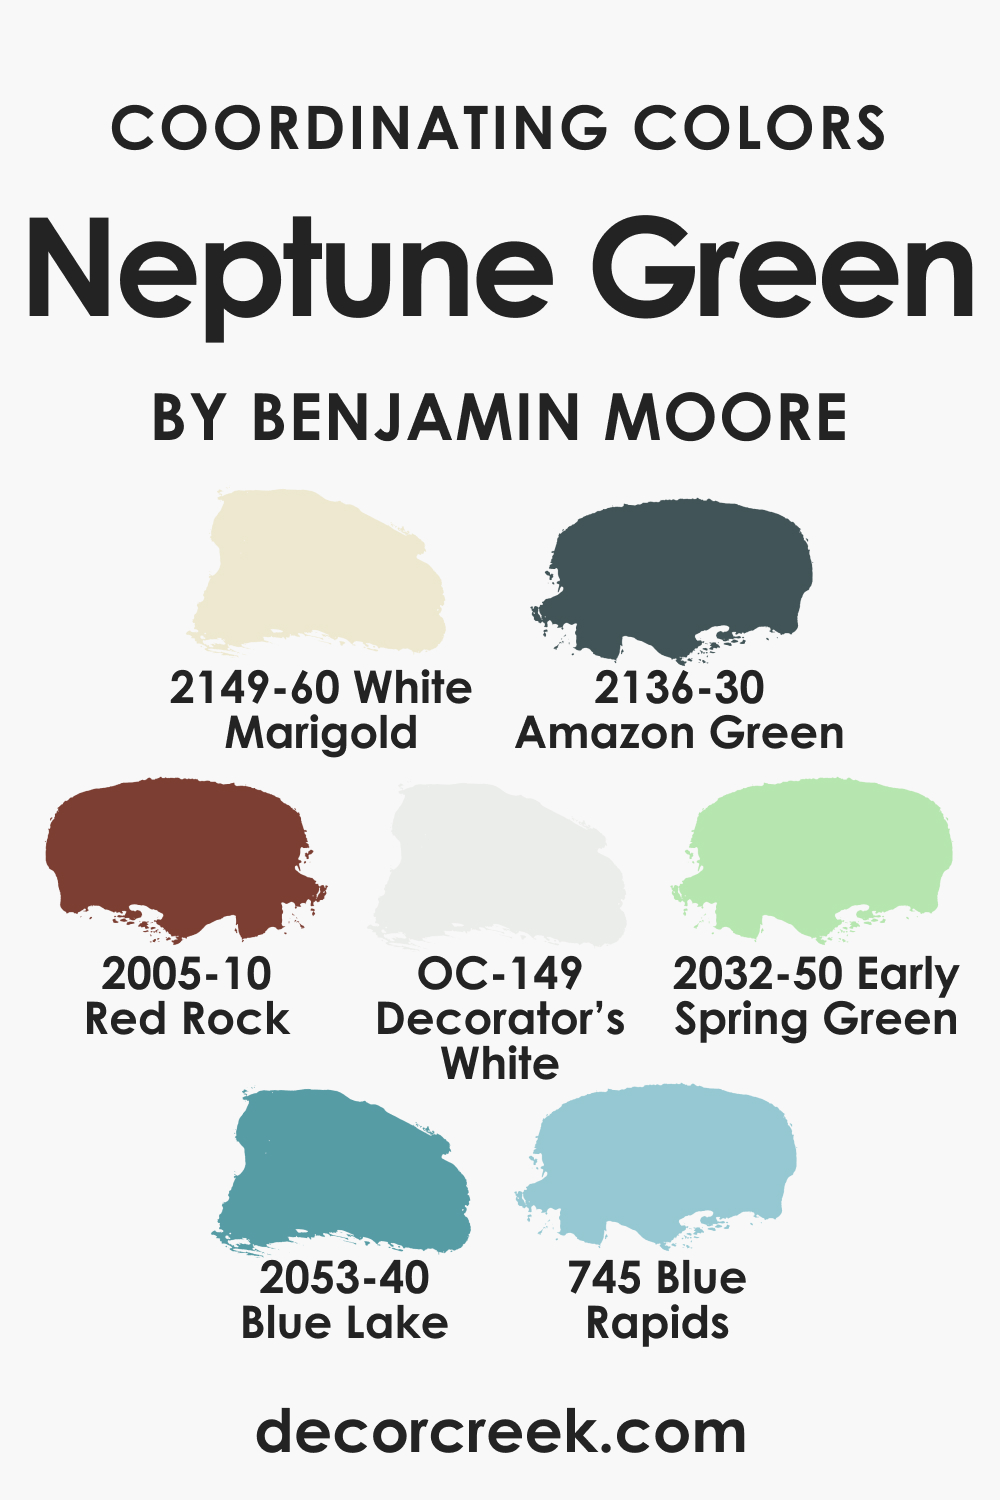 Coordinating Colors of Neptune Green 658